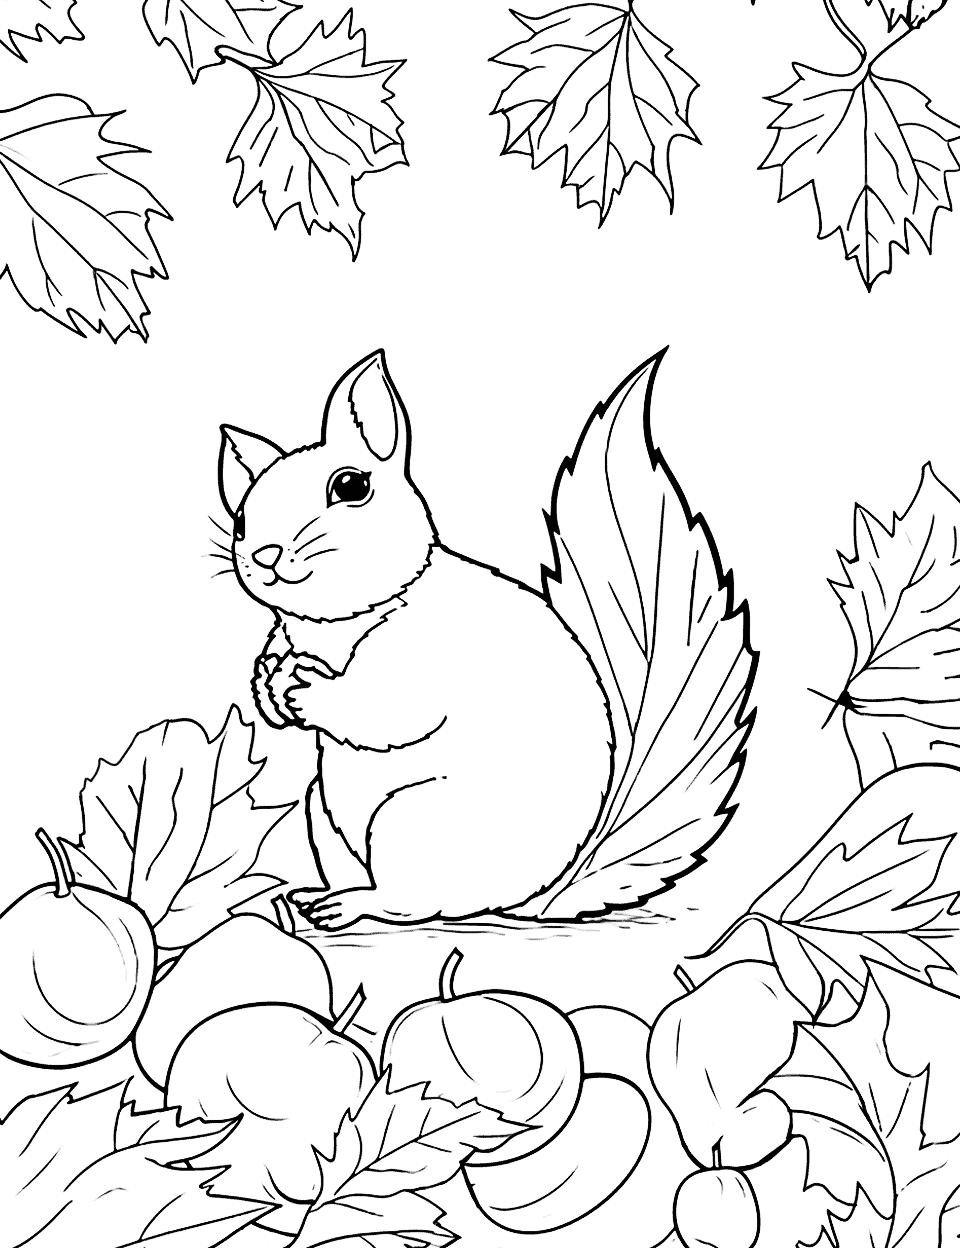 The Squirrel's Fall Stash Coloring Page - A cute squirrel gathering nuts for the winter amongst colorful autumn leaves.